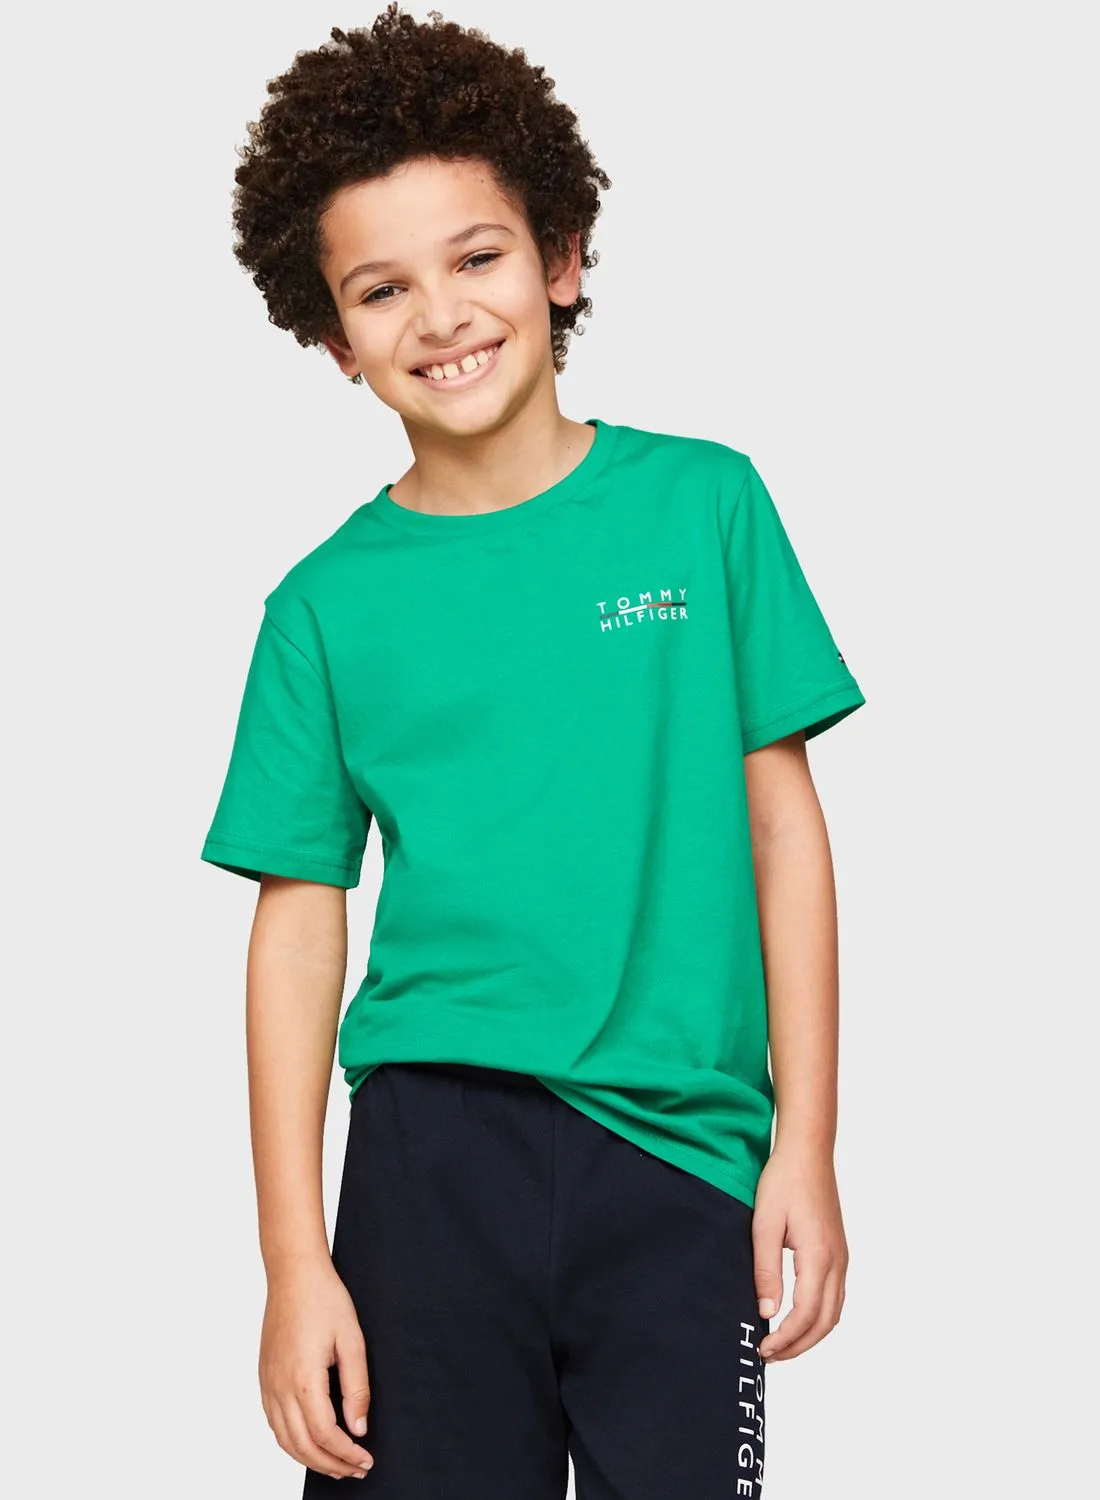 TOMMY HILFIGER Youth 2 Pack Logo T-Shirt